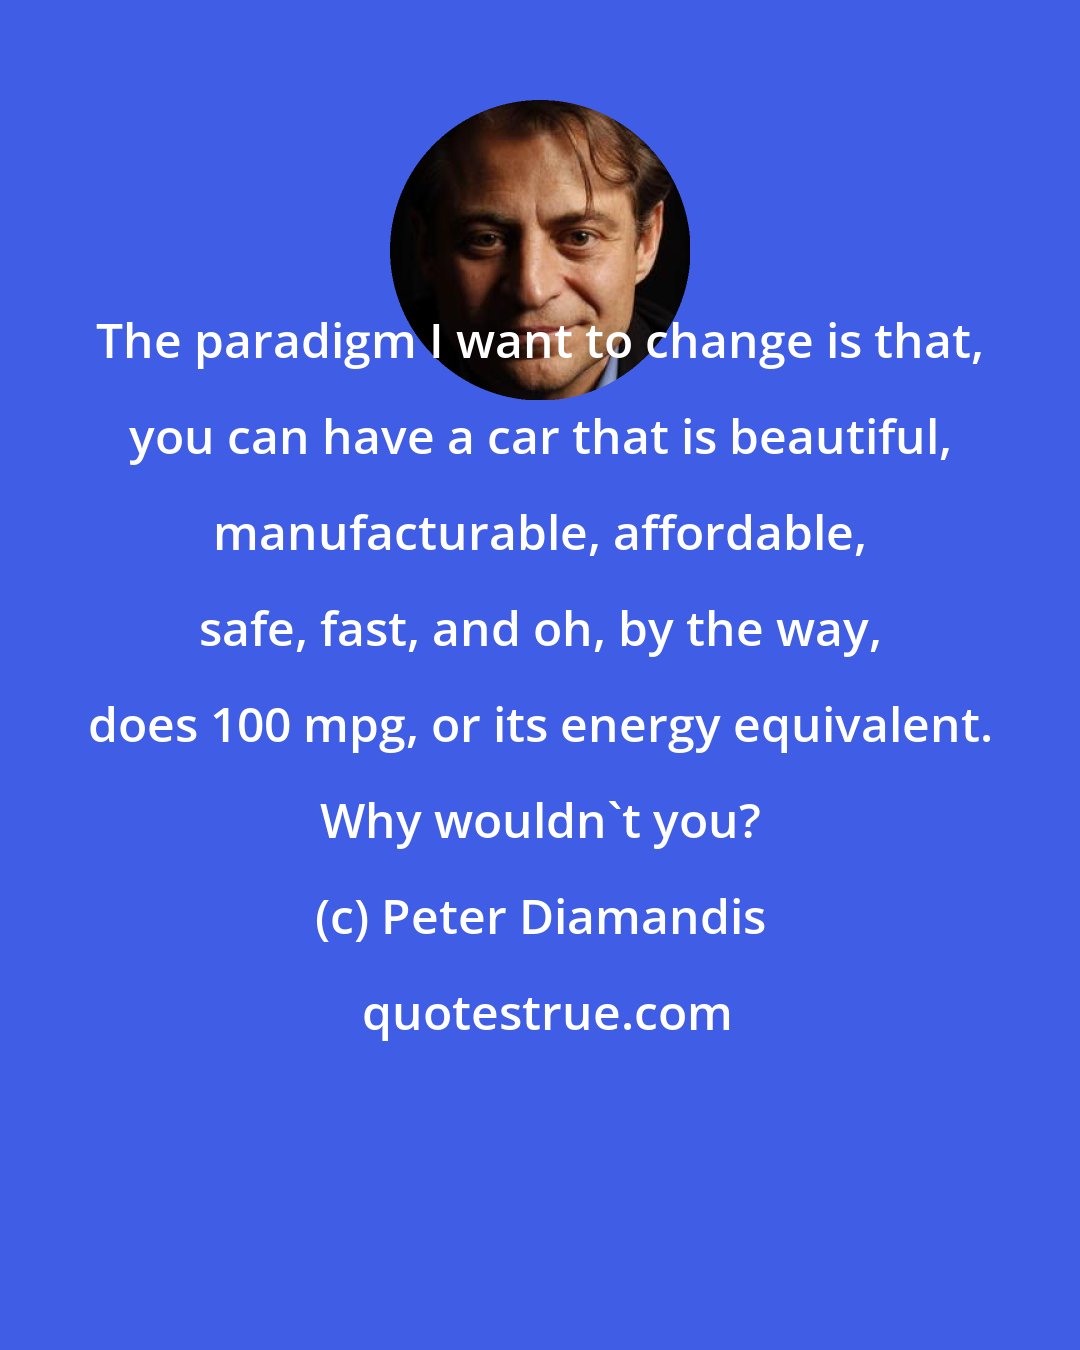 Peter Diamandis: The paradigm I want to change is that, you can have a car that is beautiful, manufacturable, affordable, safe, fast, and oh, by the way, does 100 mpg, or its energy equivalent. Why wouldn't you?